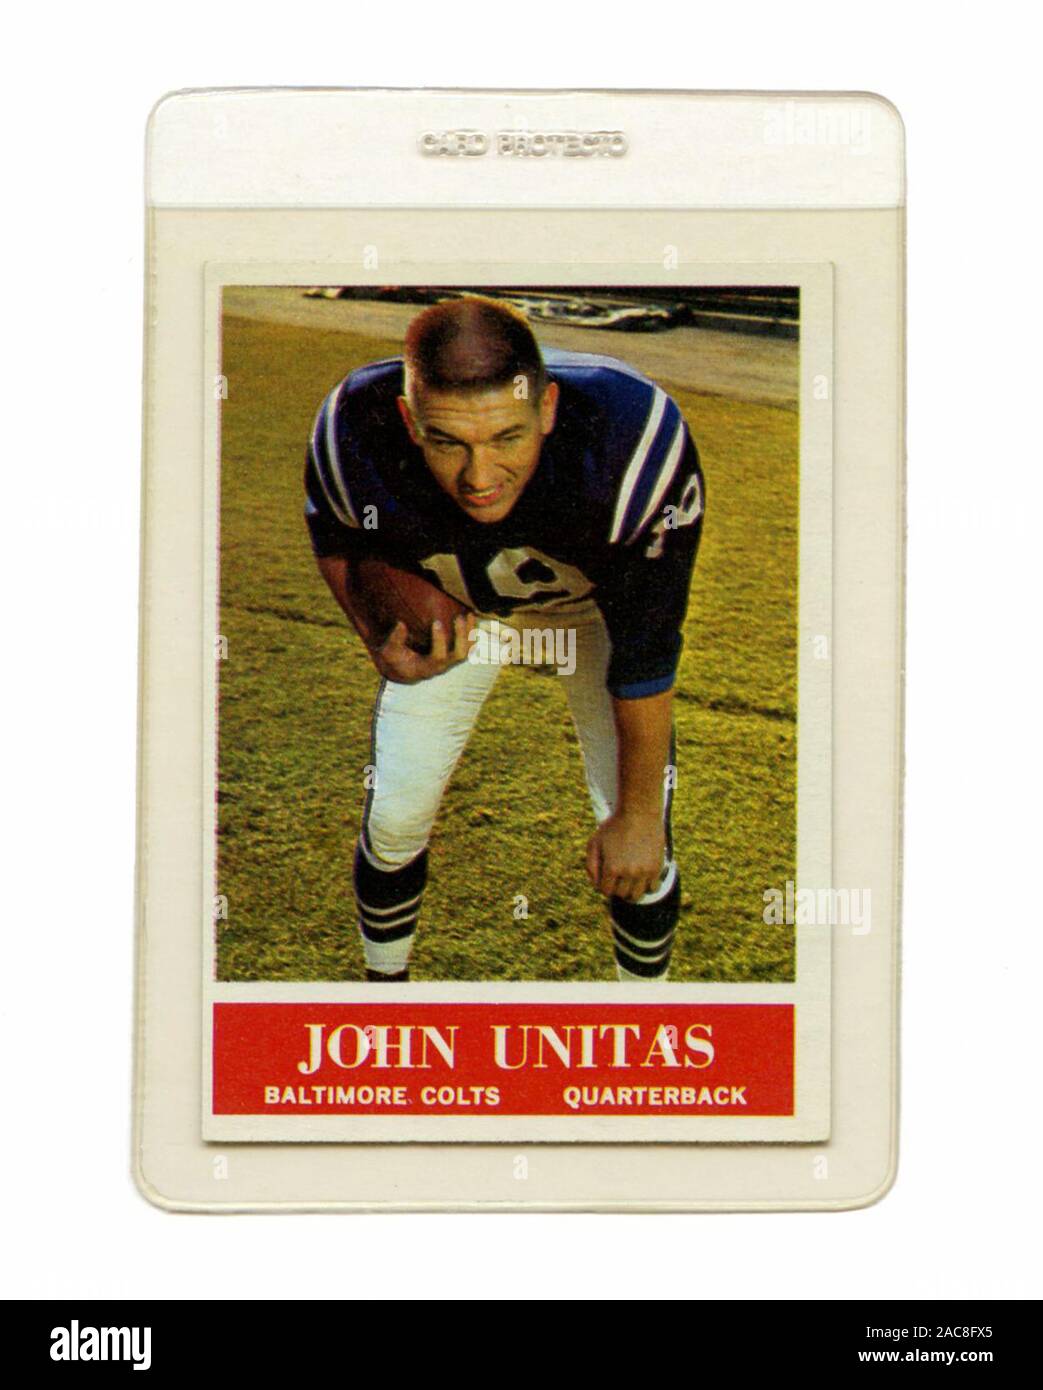 Vintage football card depicting John Unitas the quarterback with the Baltimore Colts issued by Philadelphia Gum in 1964. Stock Photo